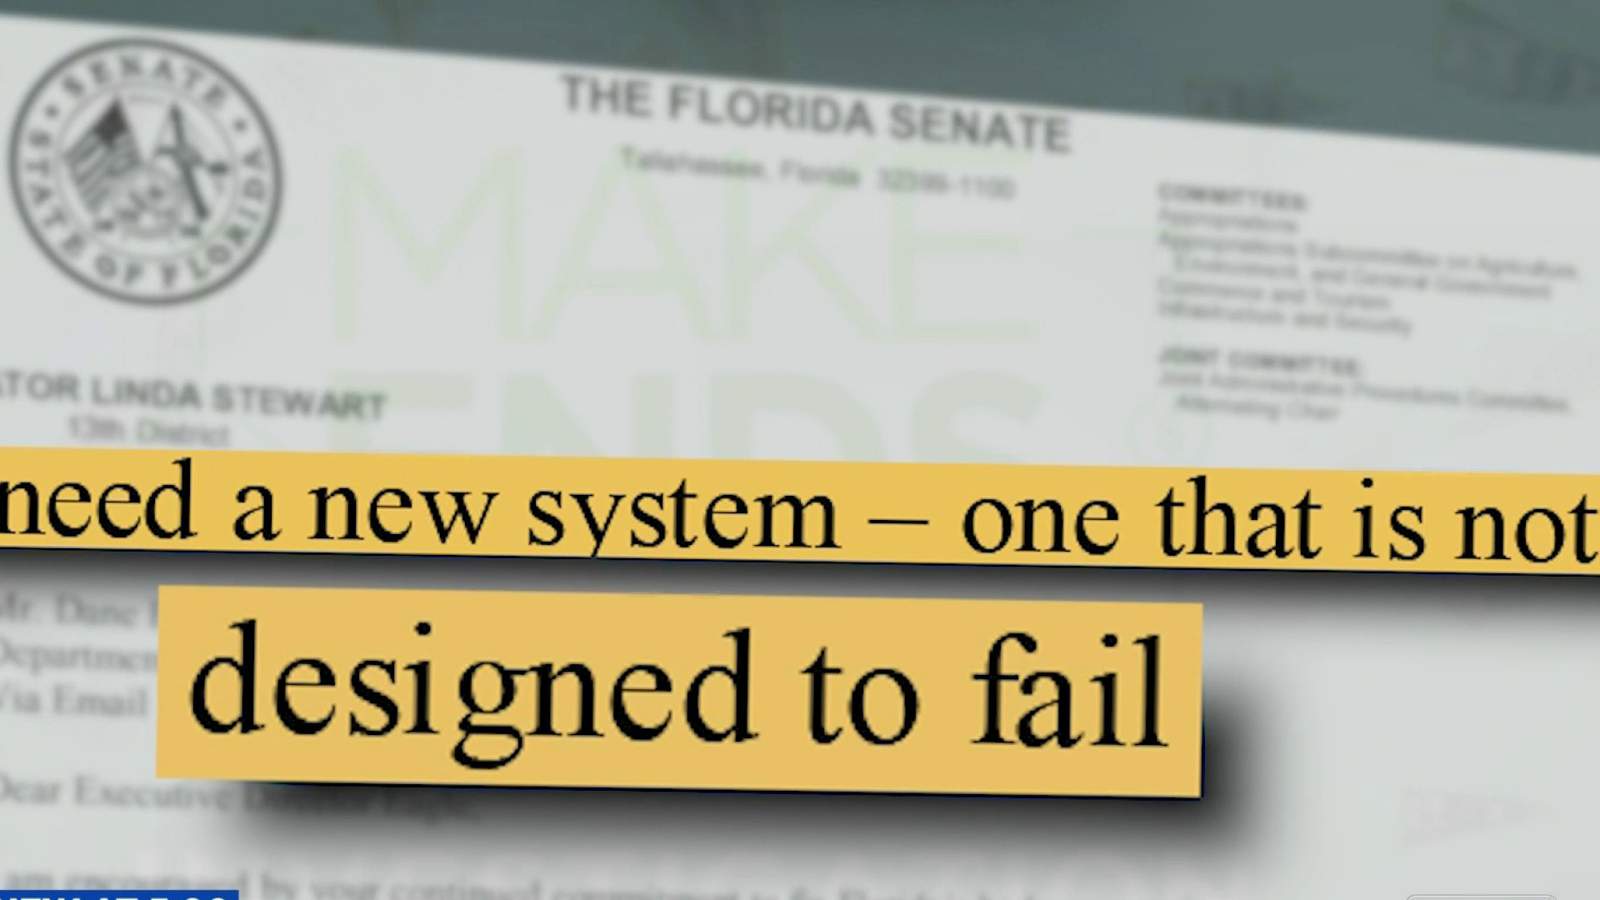 Florida lawmakers consider future of state unemployment system Connect in 2021